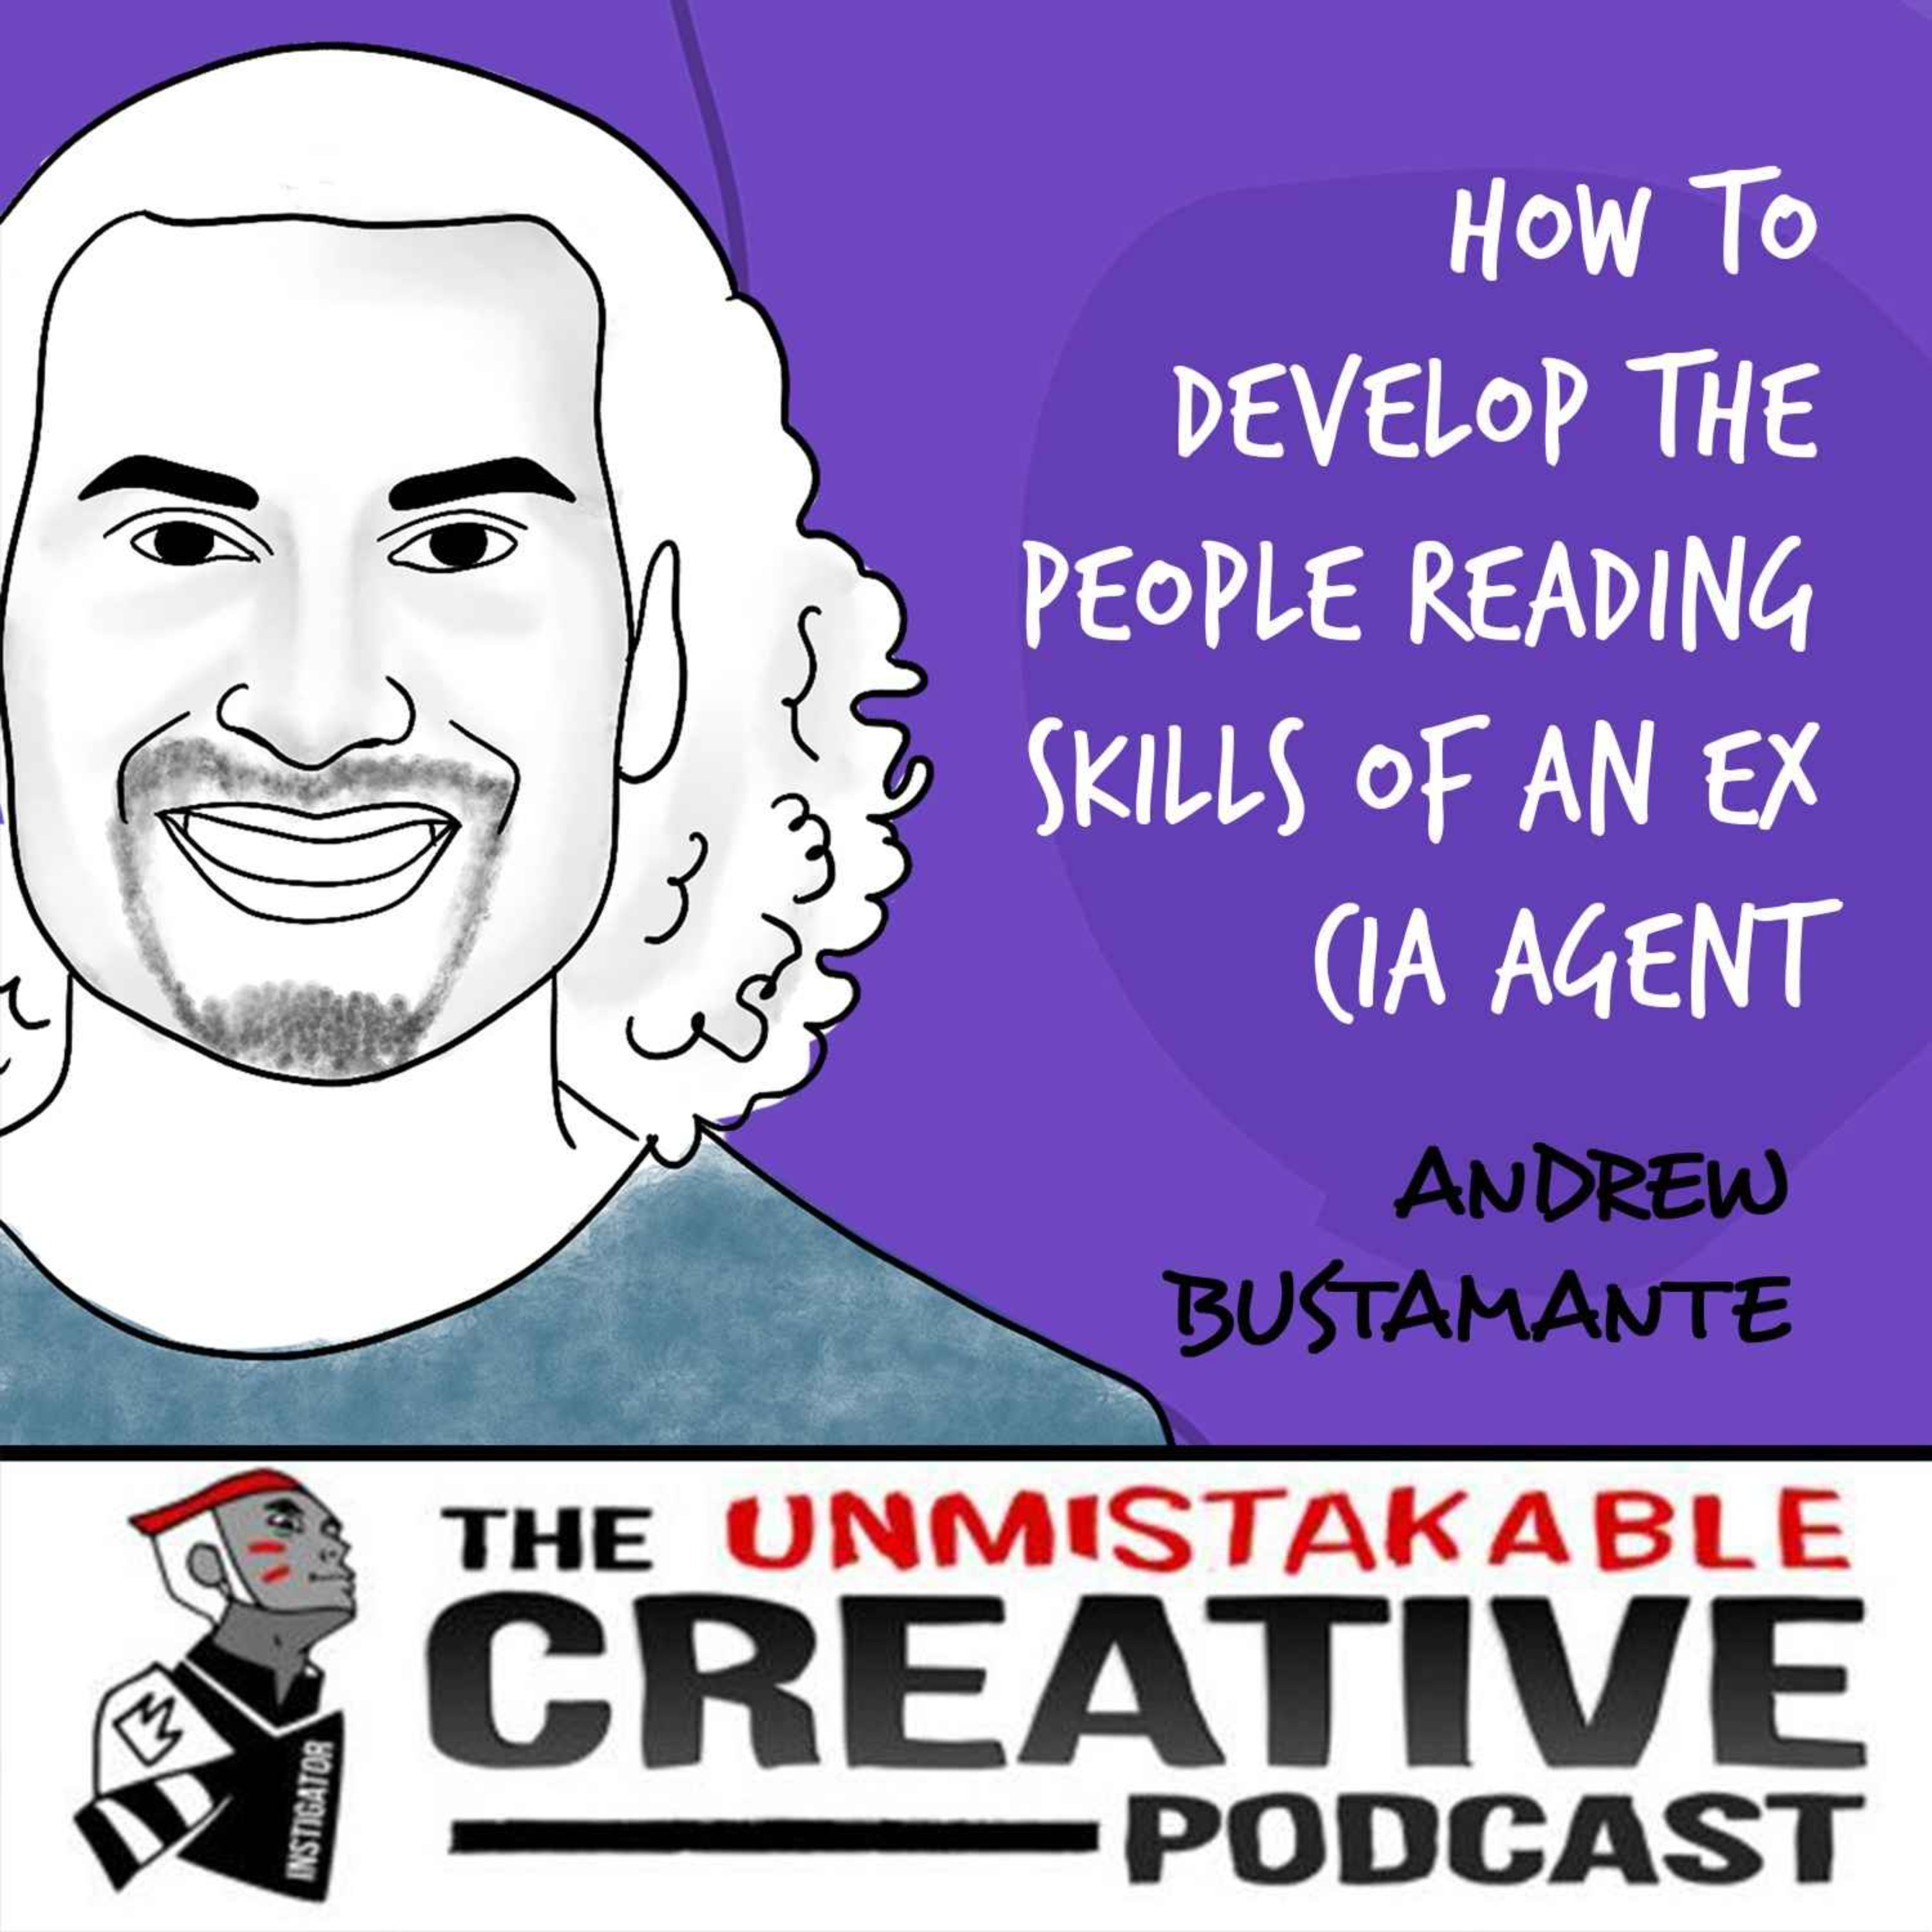 Andrew Bustamante | How to Develop the People Reading Skills of an Ex CIA Agent Image